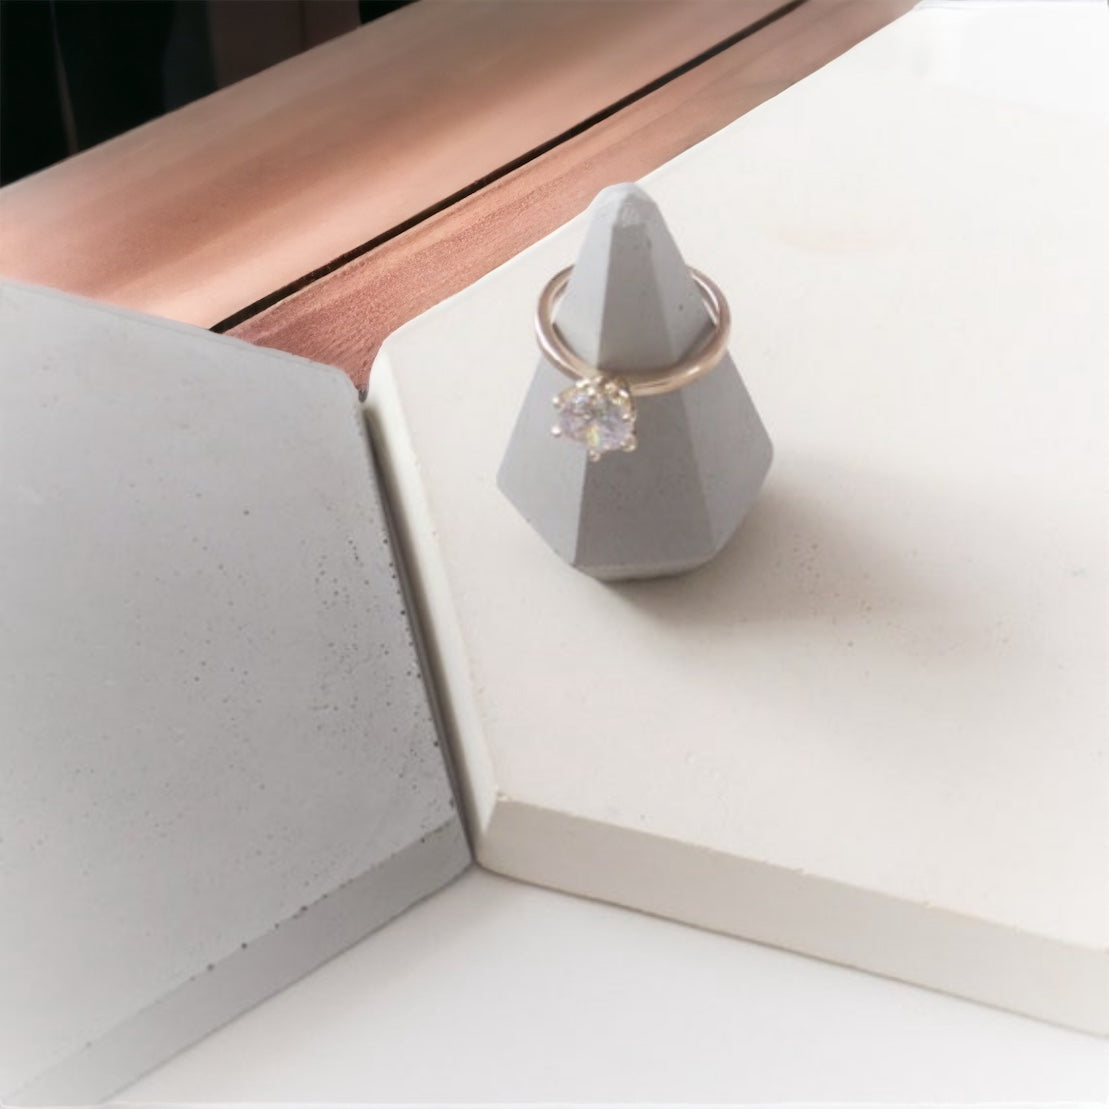 Gray ring holder in the shape of a diamond